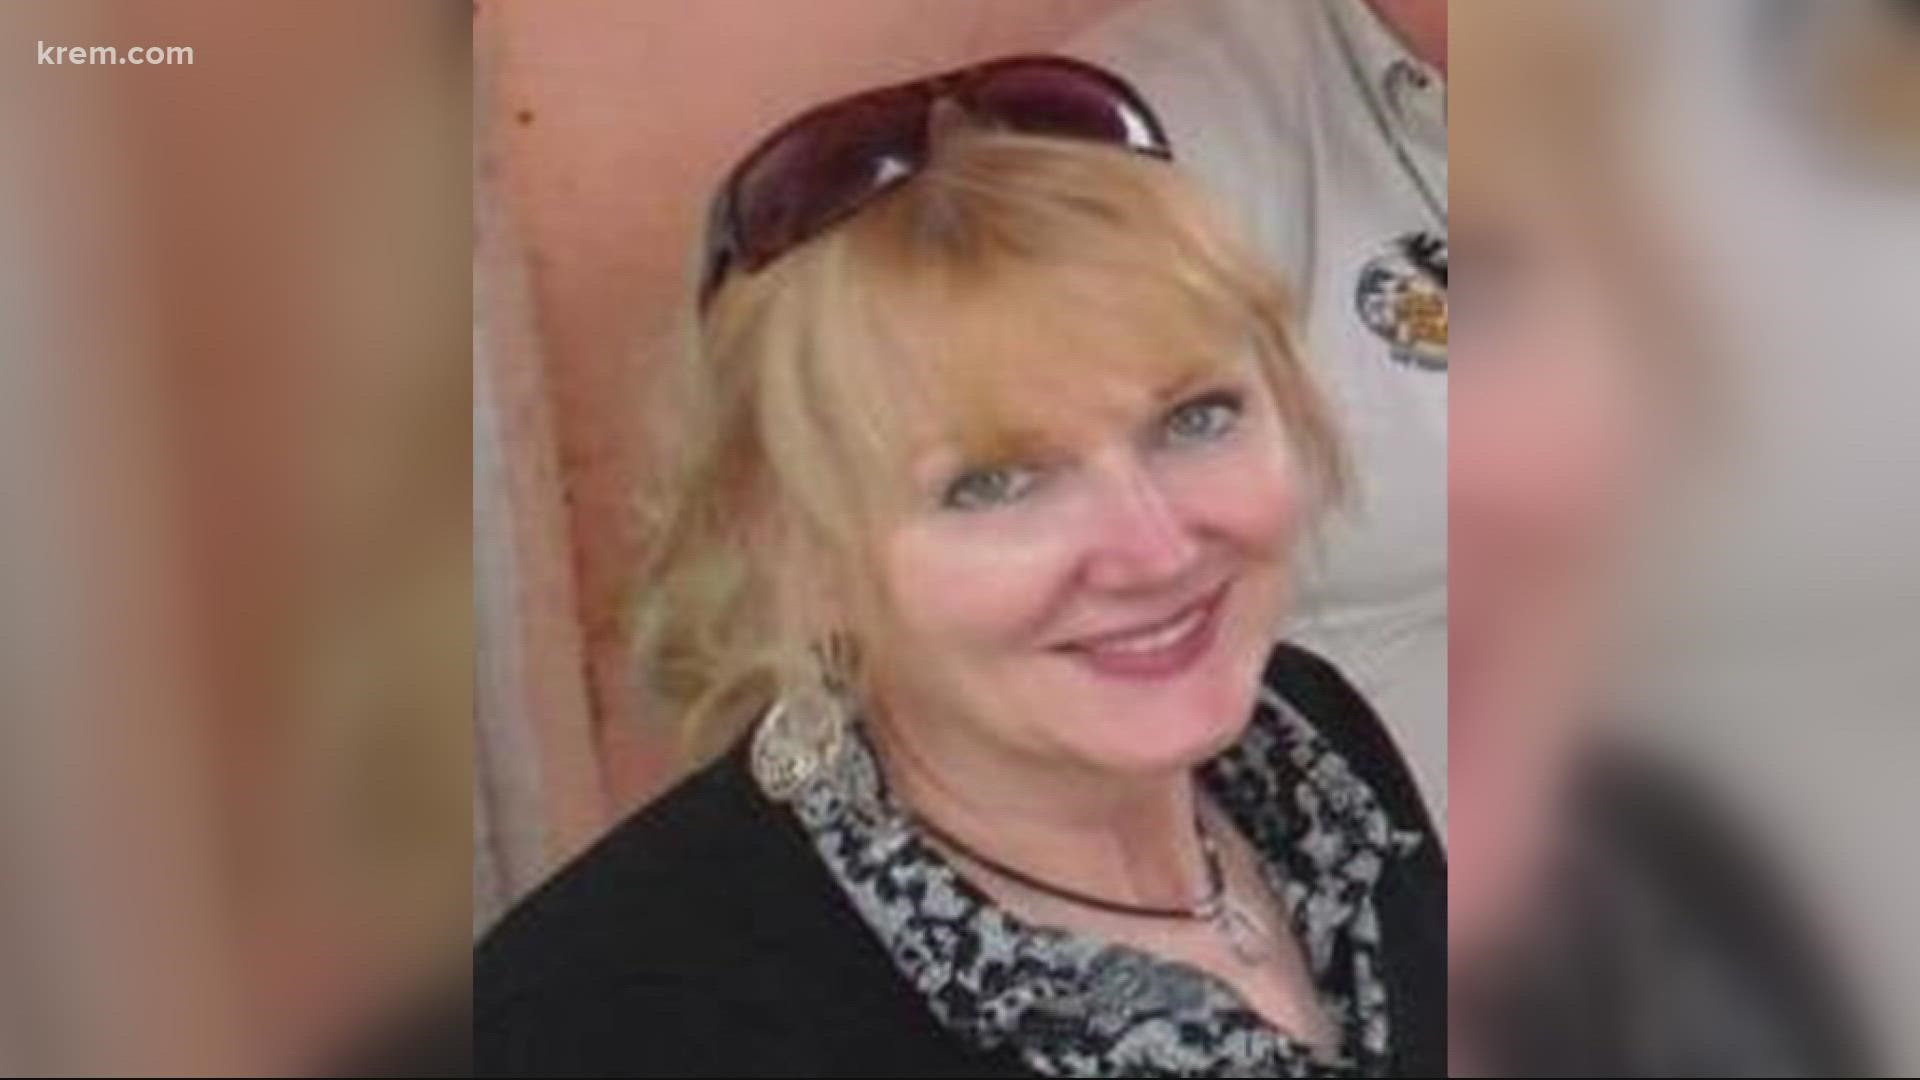 Peggy (P.J.) Burgess was last seen on Monday in Kalispell, Montana, but later that day, her cellphone pinged near St. Maries, Idaho, her daughter said.